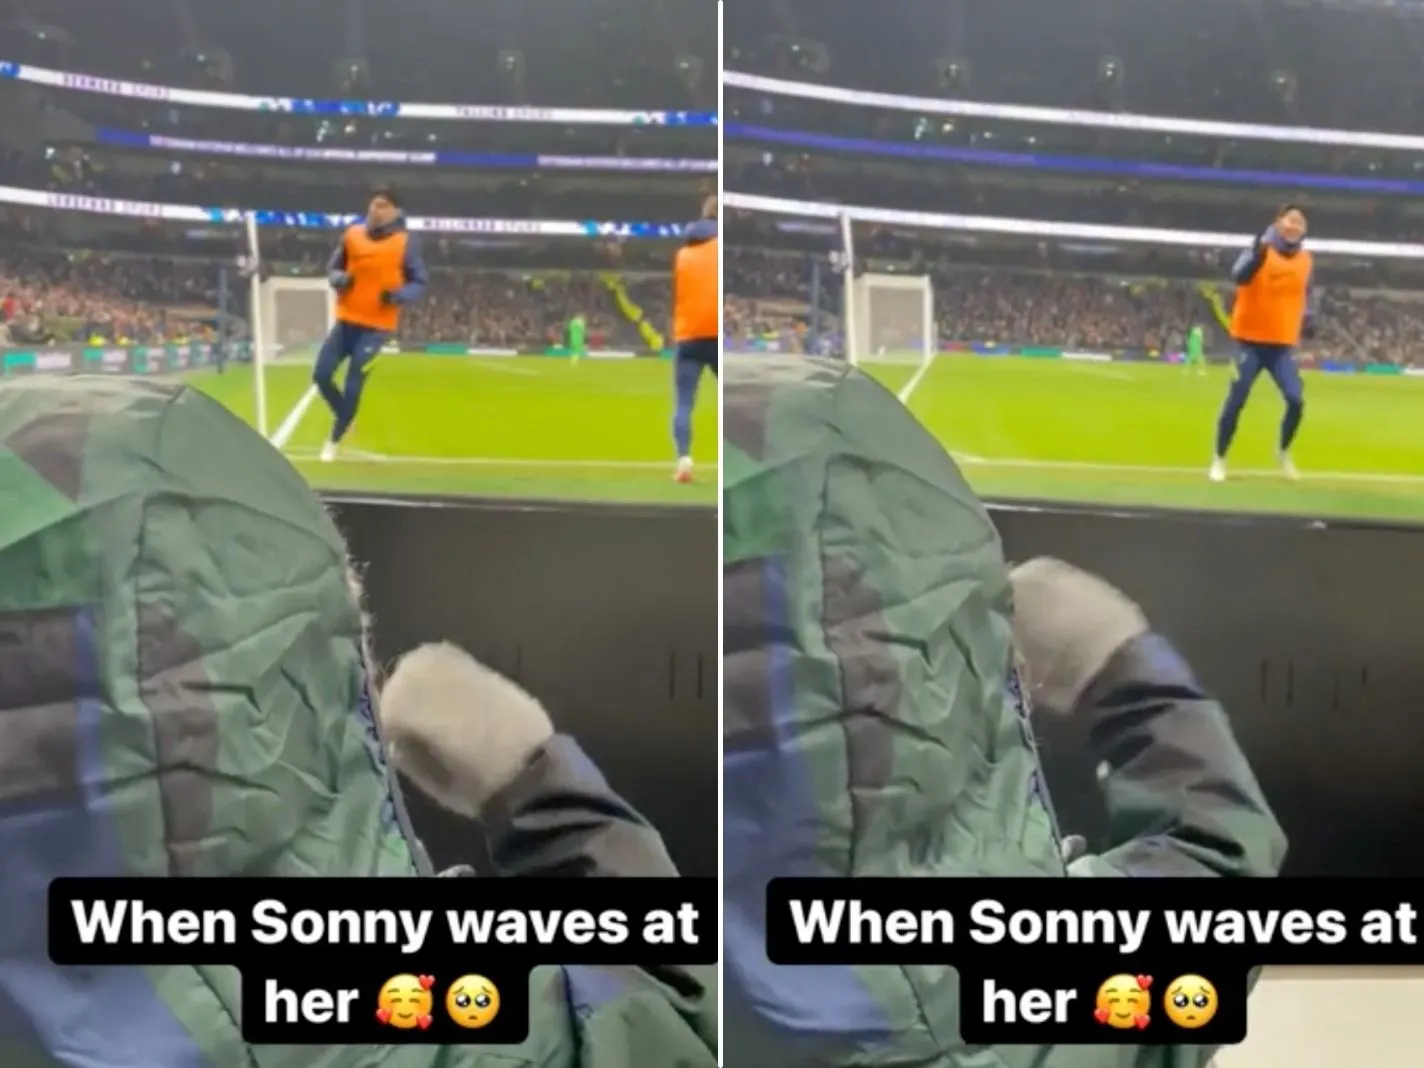 Son Heung-min makes a little girl's day by waving back at her during warm-up